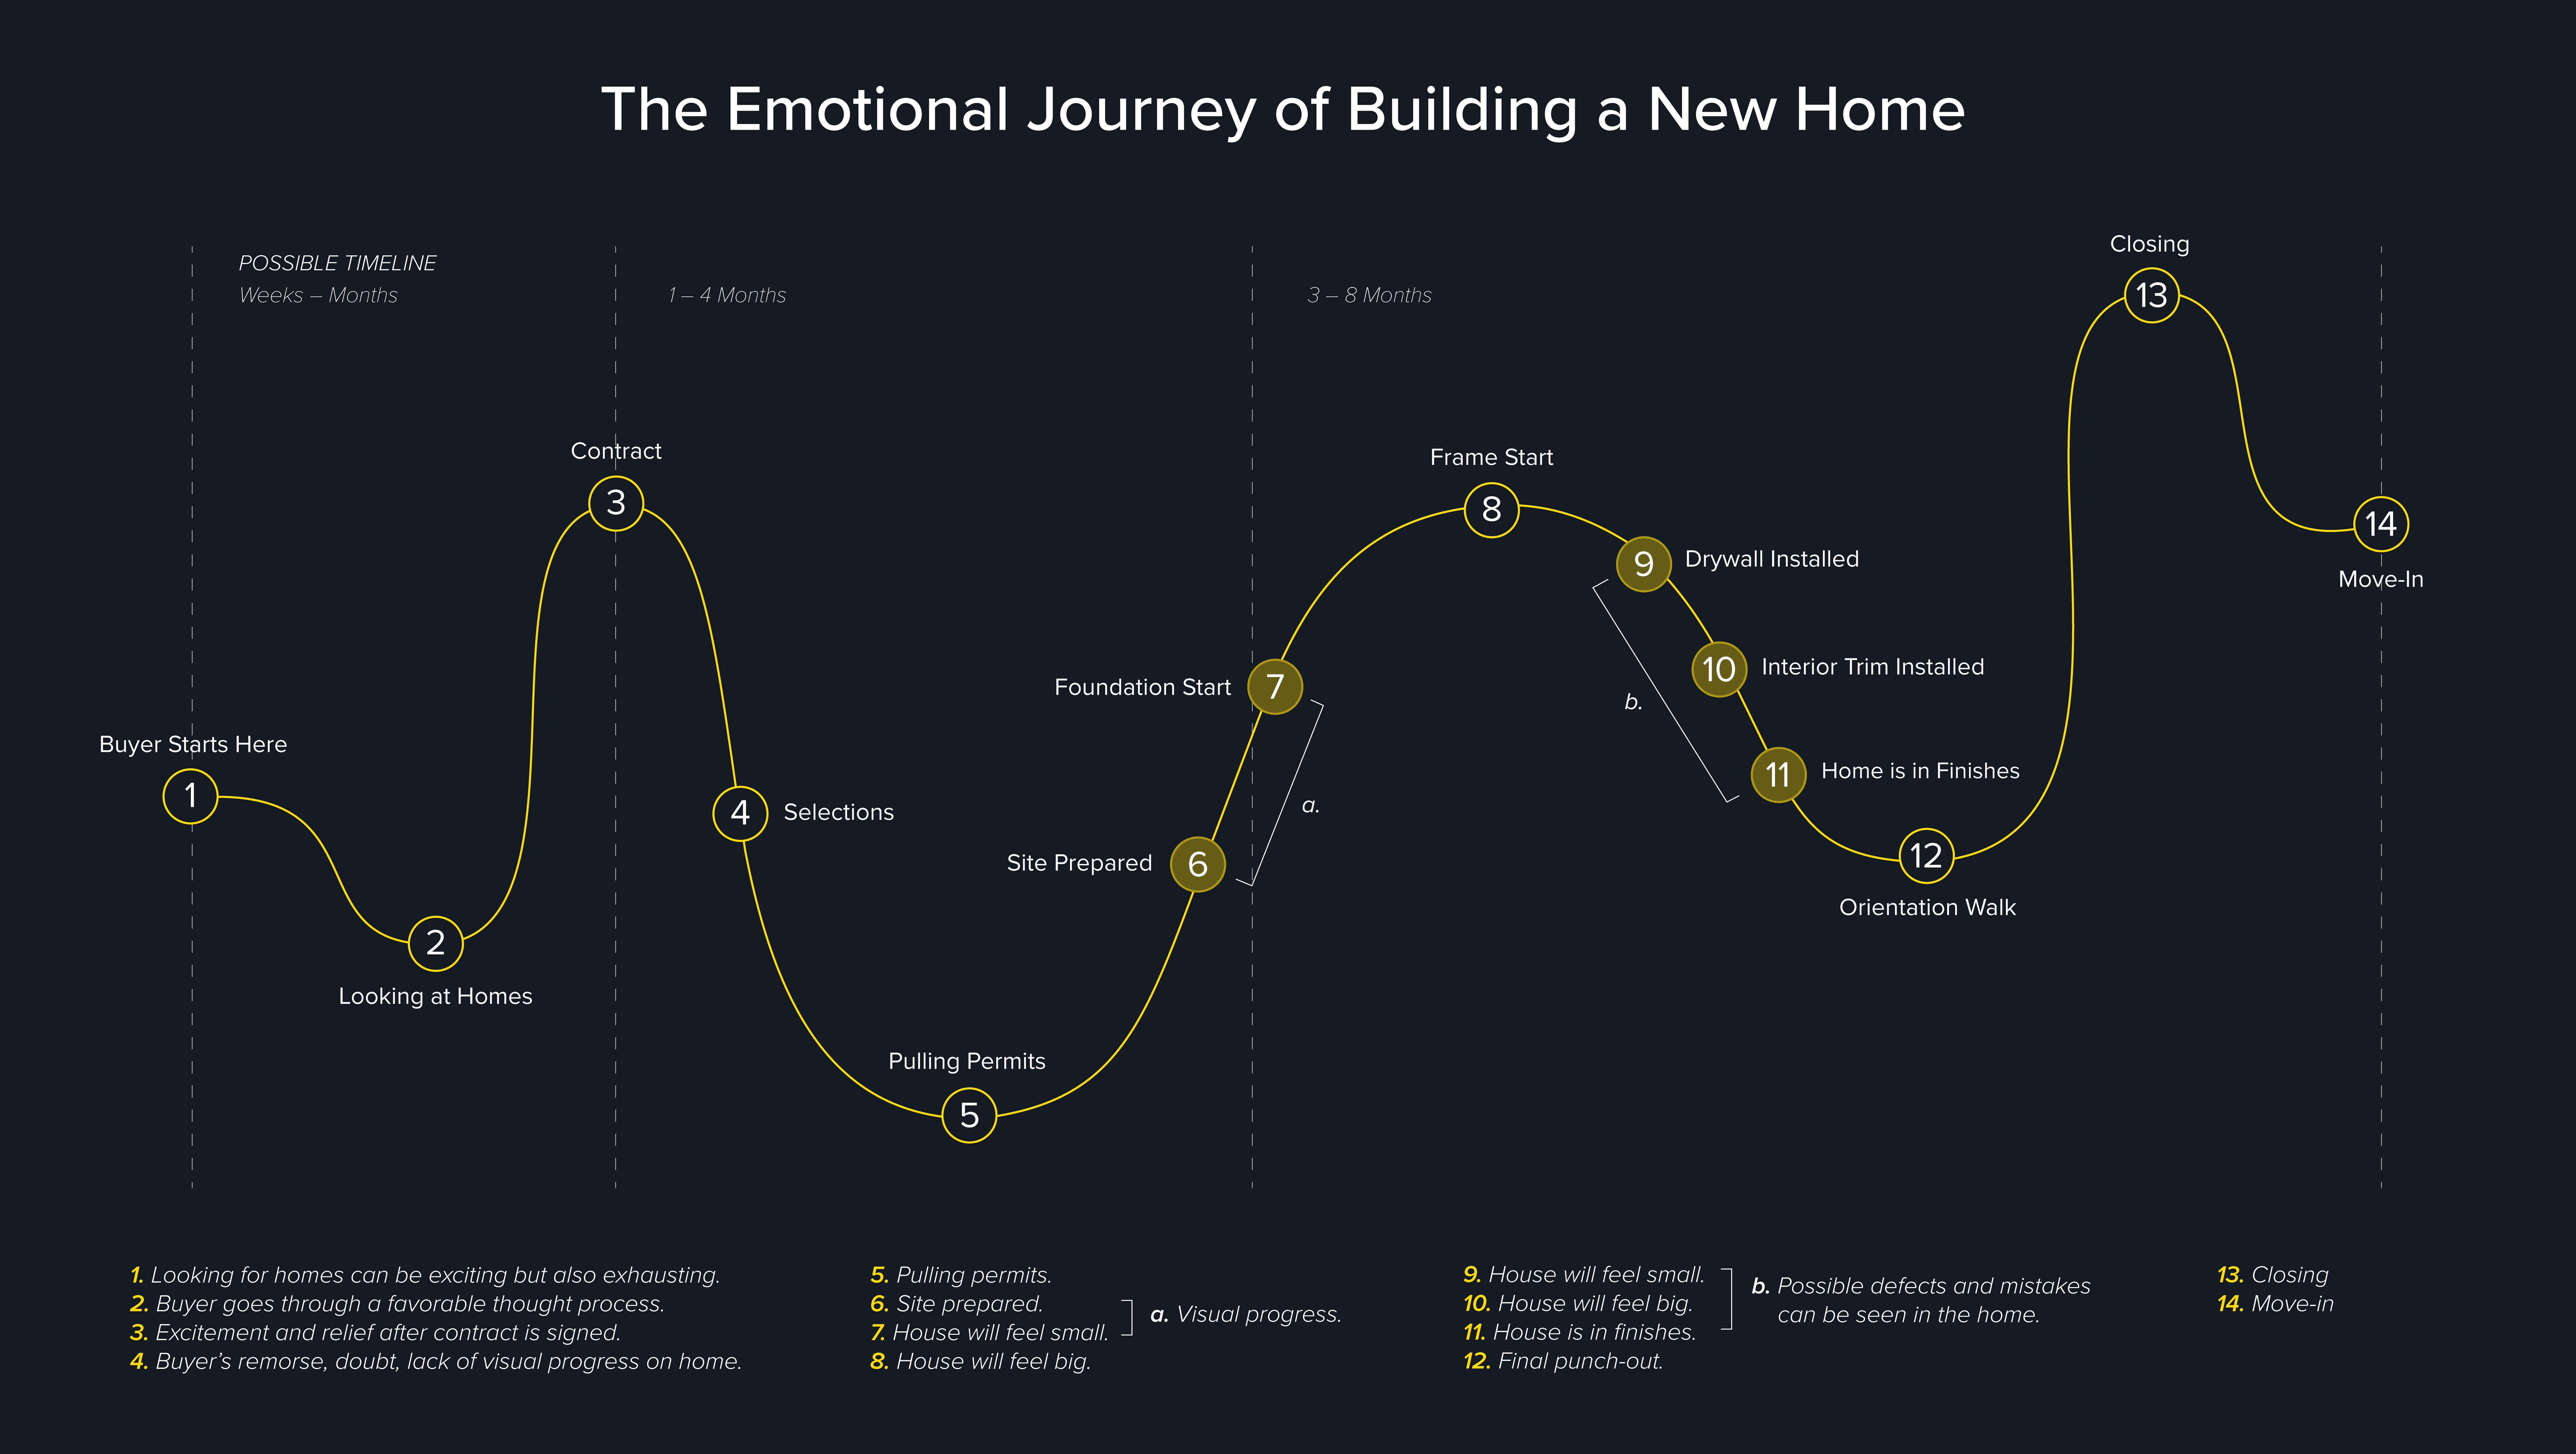 Graphic Describing the Emotional Journey of Building a New Home 